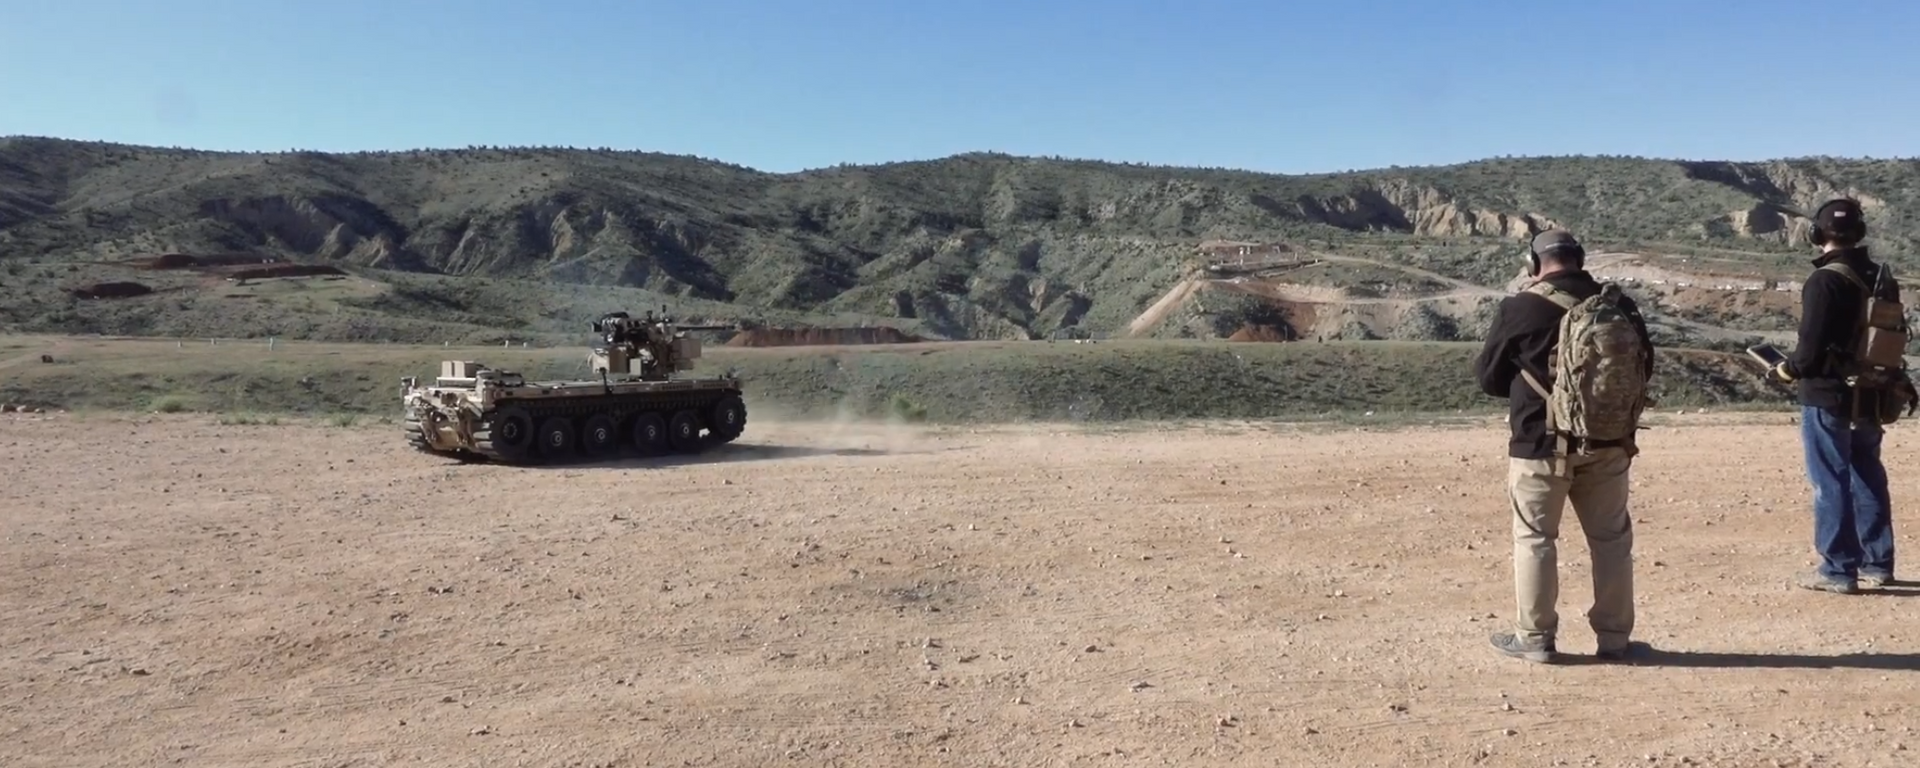 During a recent test, the team of Pratt & Miller, Northrop Grumman and EOS, showed the capability of the Pratt & Miller expeditionary modular autonomous vehicle, or EMAV to fire the M230 Link Fed (M230LF) integrated on the vehicle with the EOS R400 Remote Weapons station. - Sputnik International, 1920, 10.07.2020